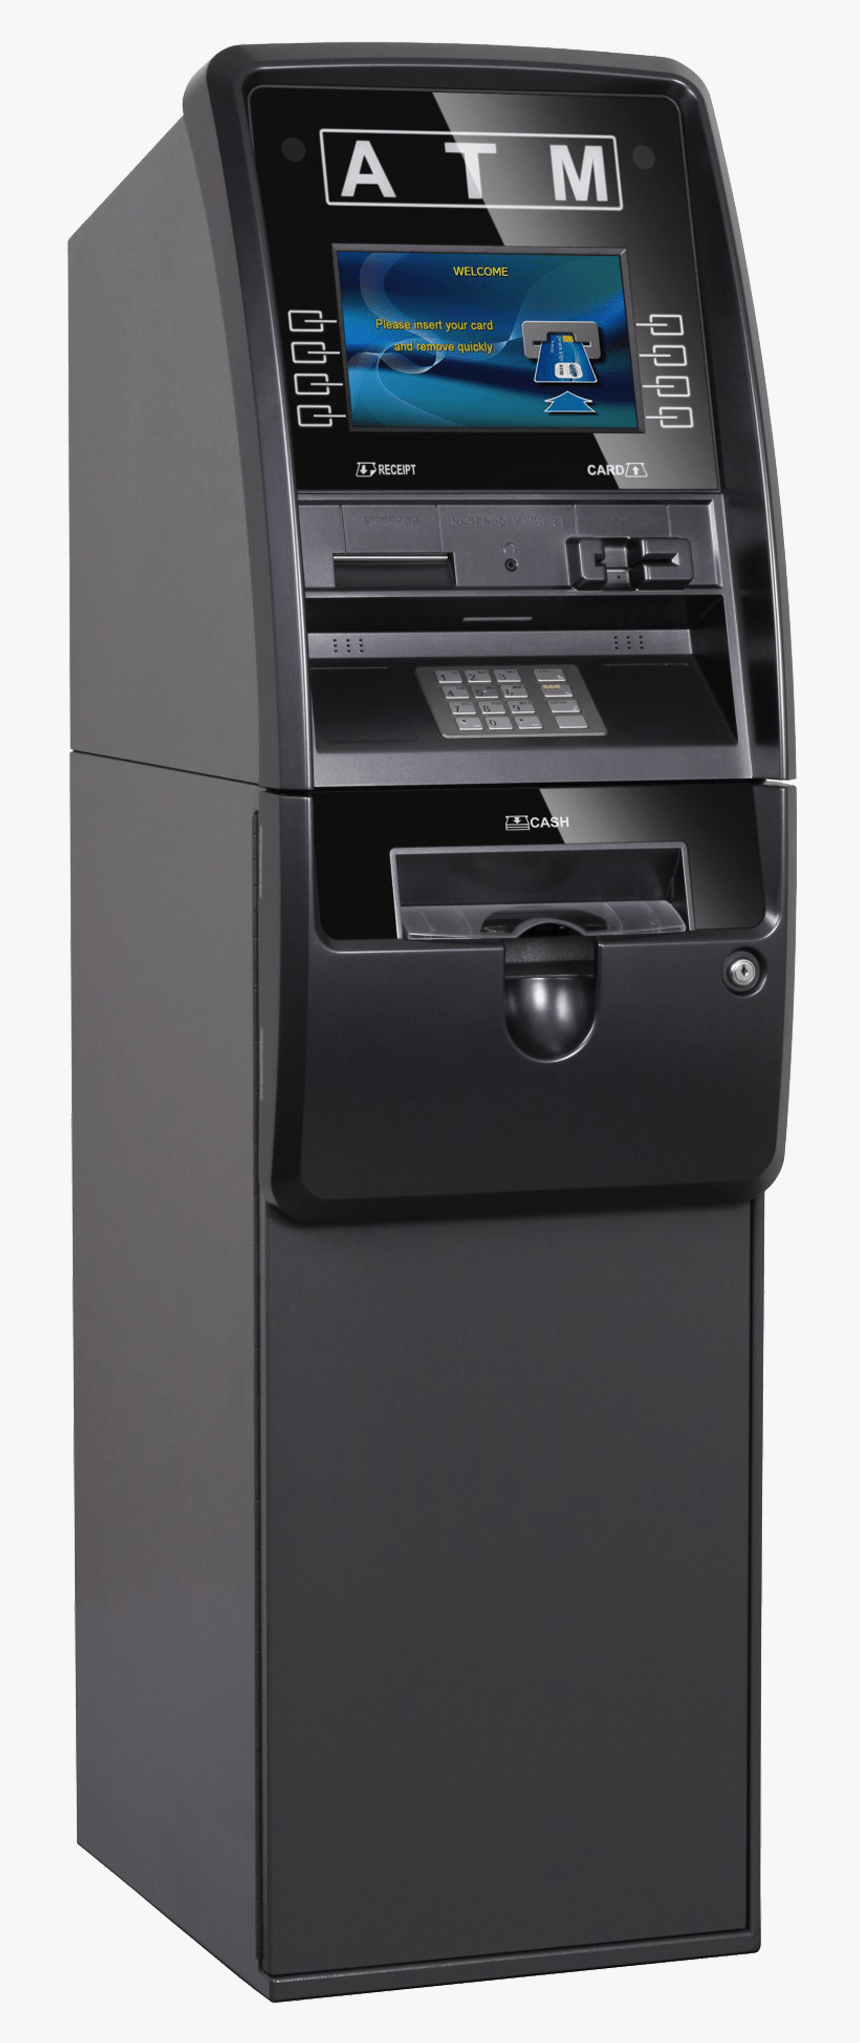 Genmega Onyx Atm From Empire Atm Group, Empireatmgroup - Machines Atm, HD Png Download, Free Download